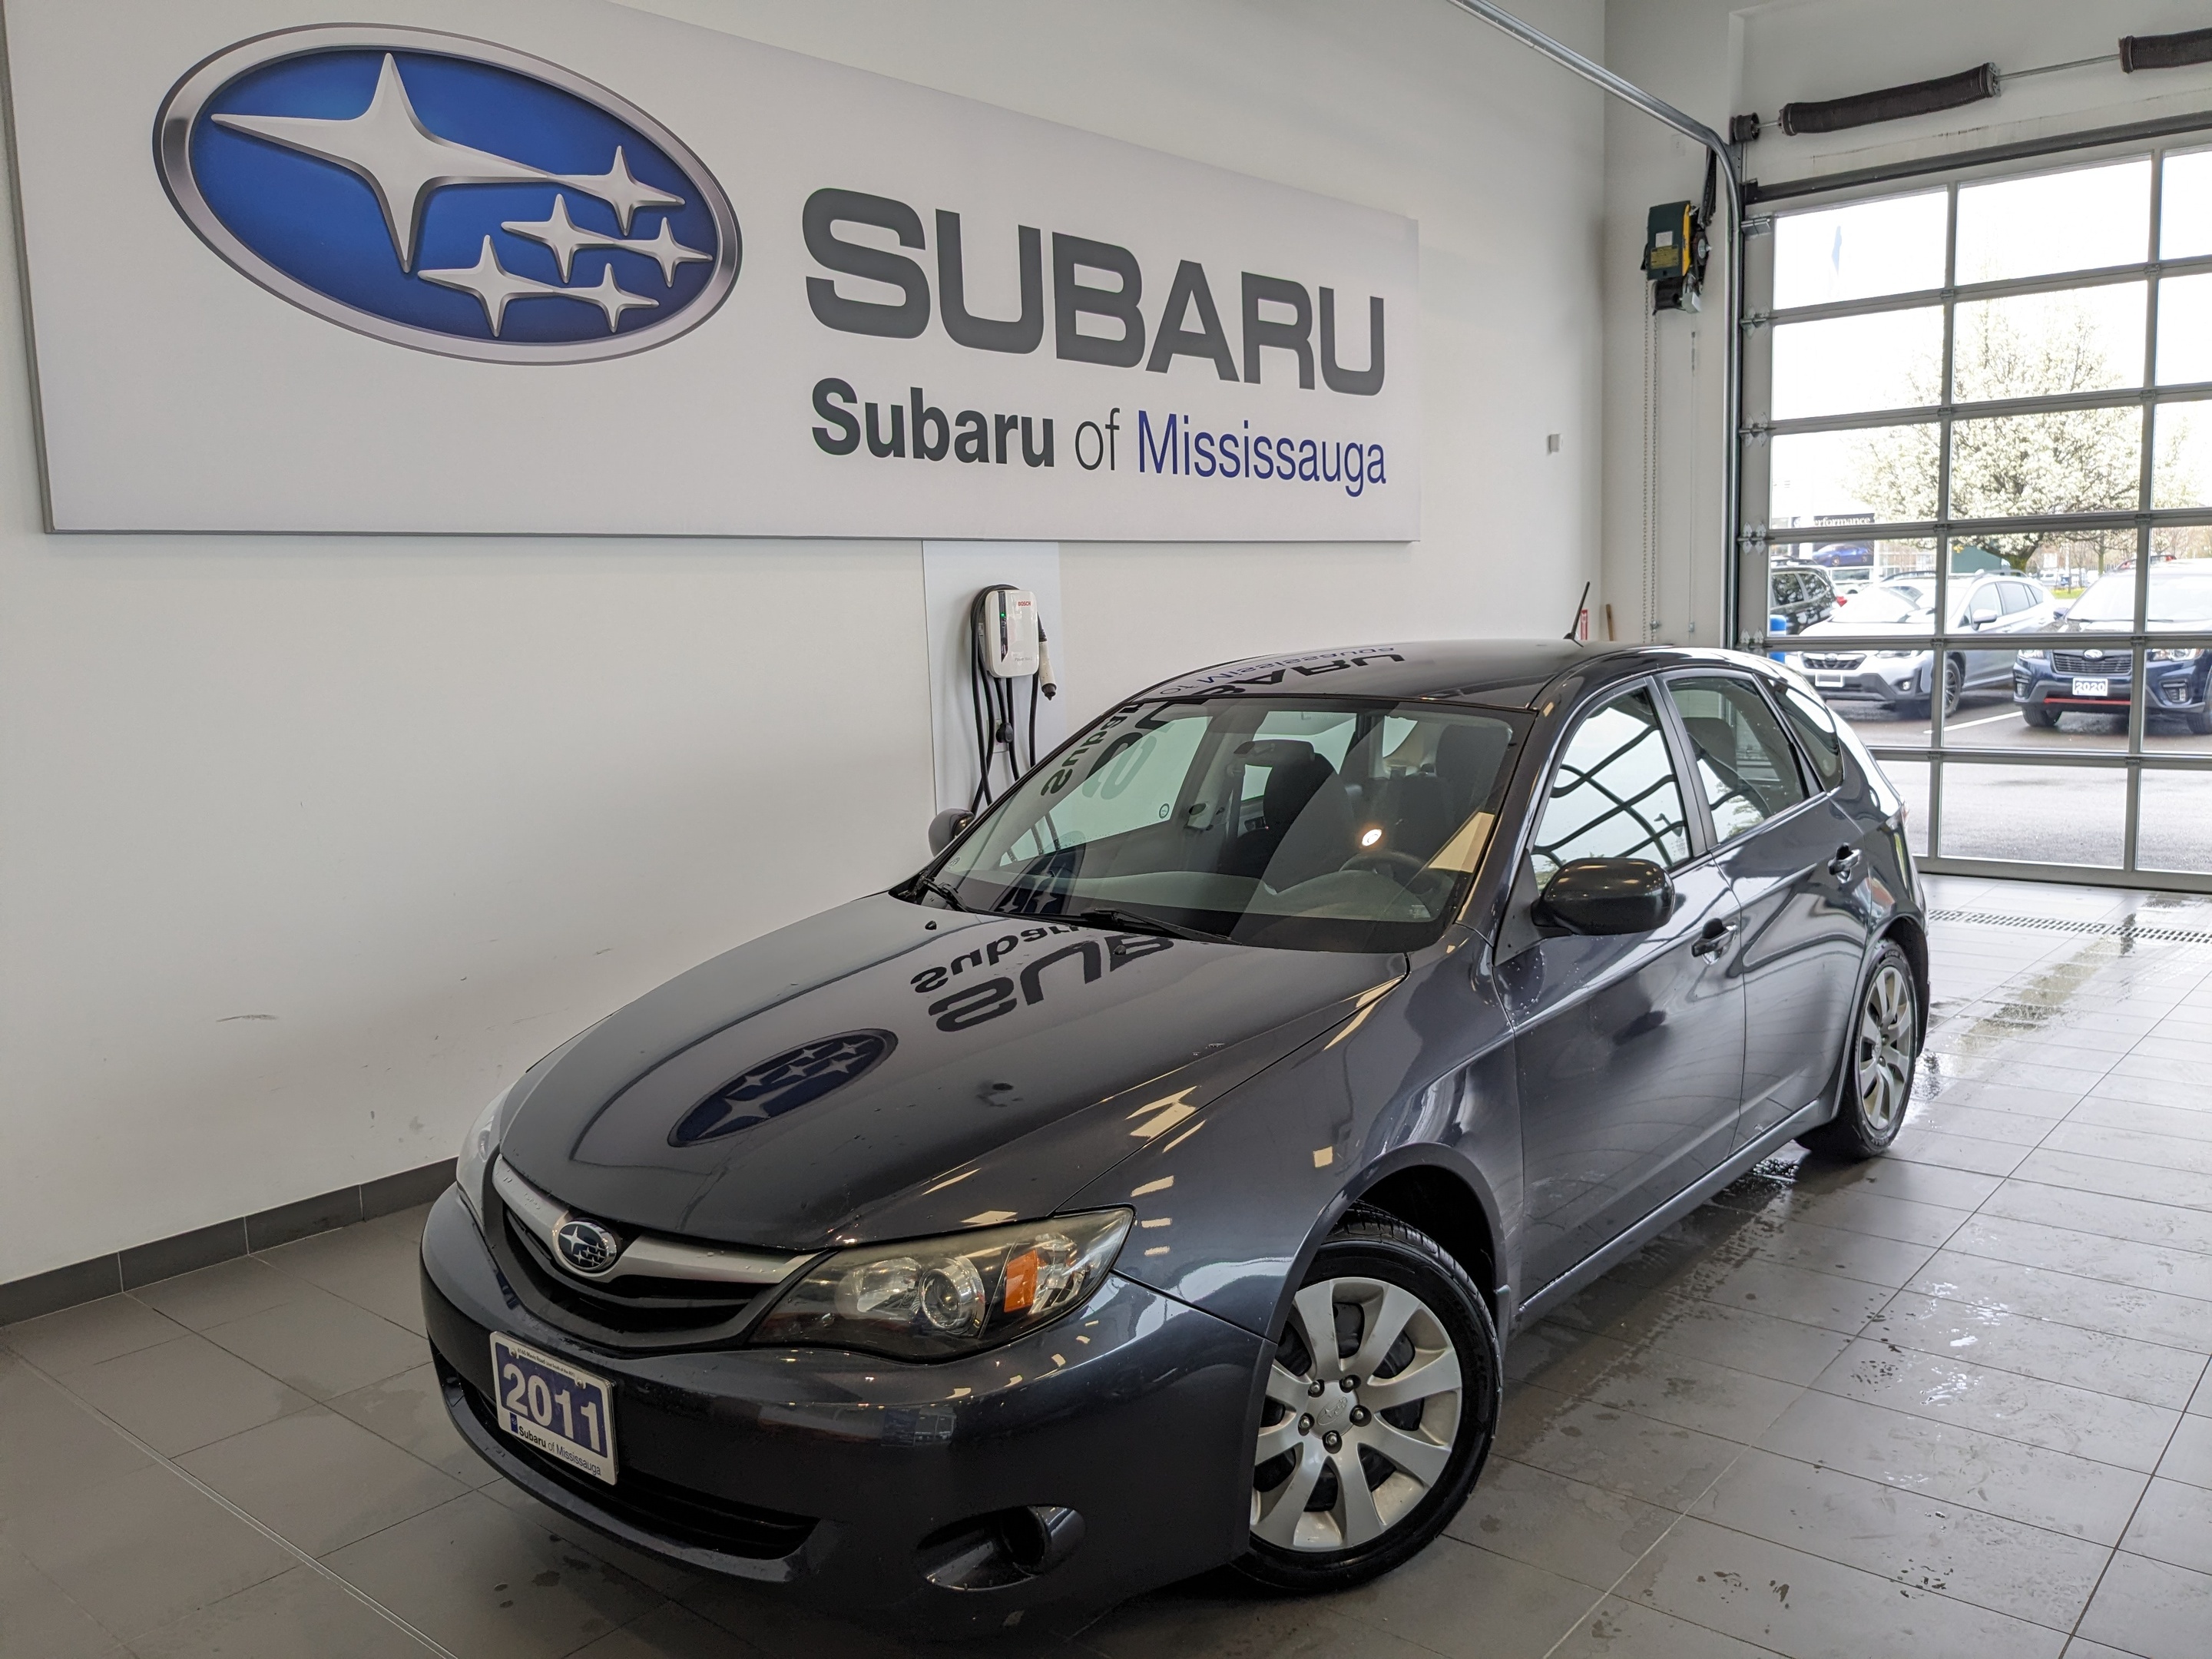 2011 Subaru Impreza CLEAN CARFAX | LOW KM | SOLD AS IS | DRIVES GREAT!